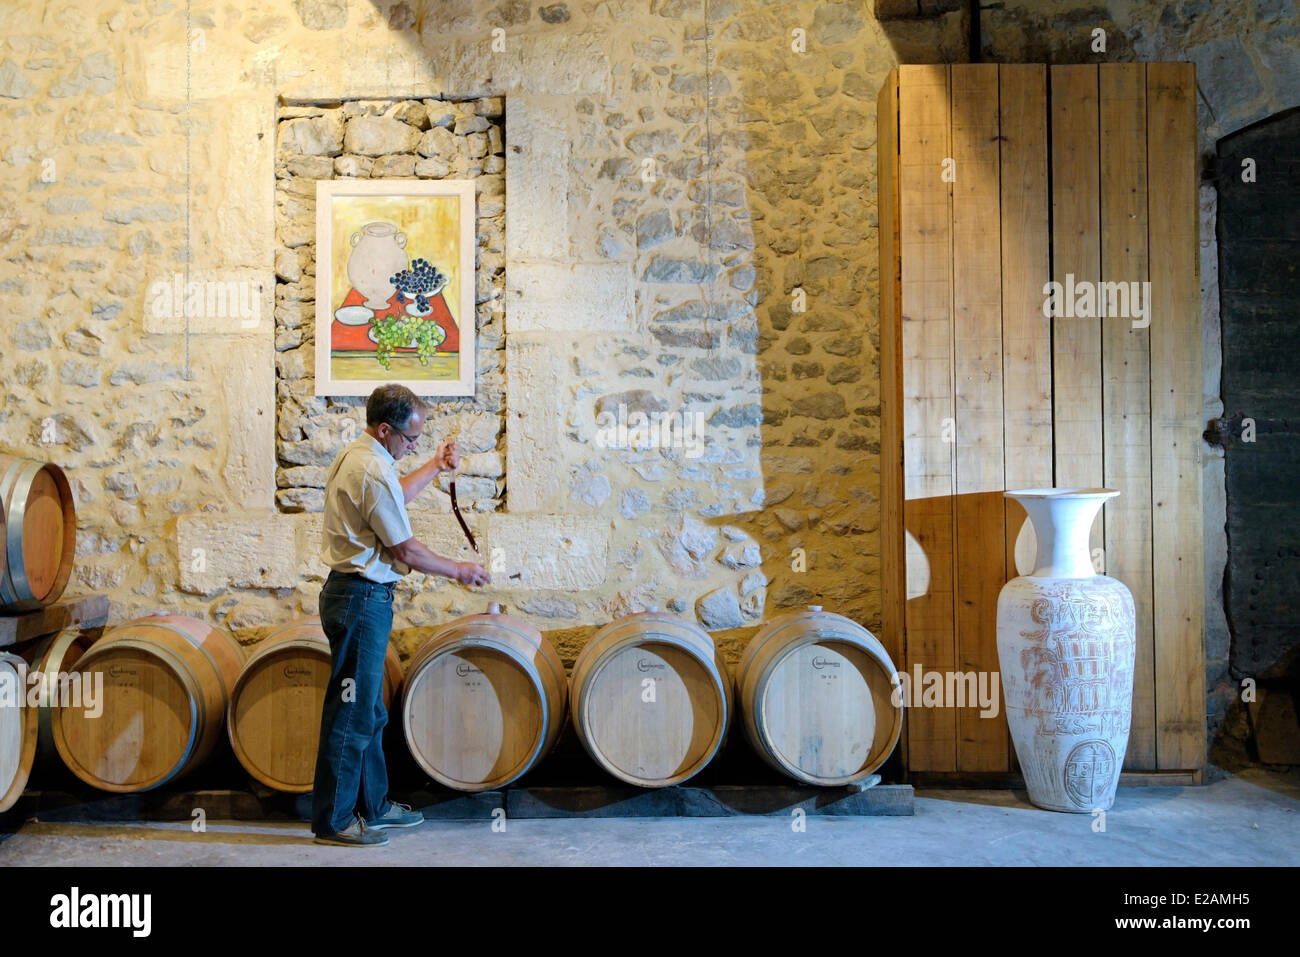 France, Herault, Saint Aunes, Chateau les Mazes domain, sampling wine from the pipette barrel in the cellar for a tasting, Stock Photo